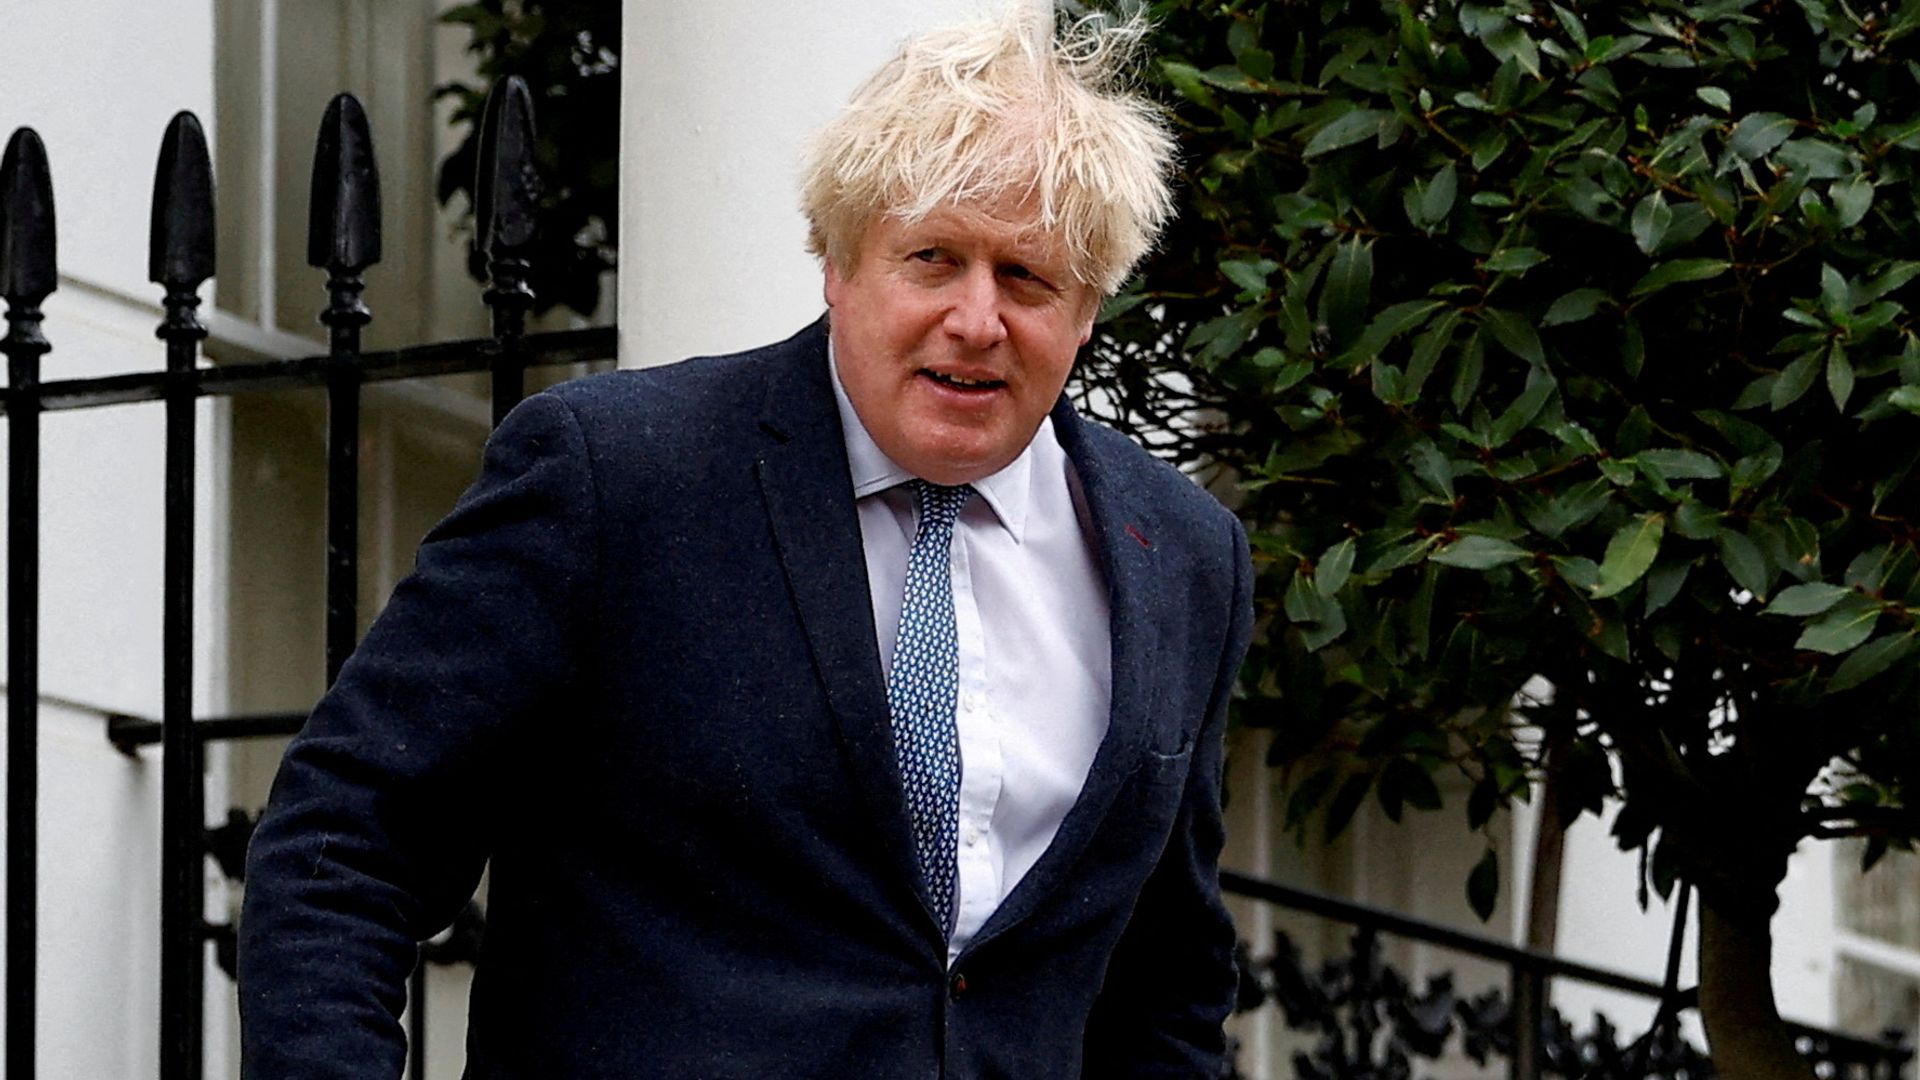 A report on the partygate scandal concluded that Boris Johnson misled Parliament about parties he held during the pandemic.